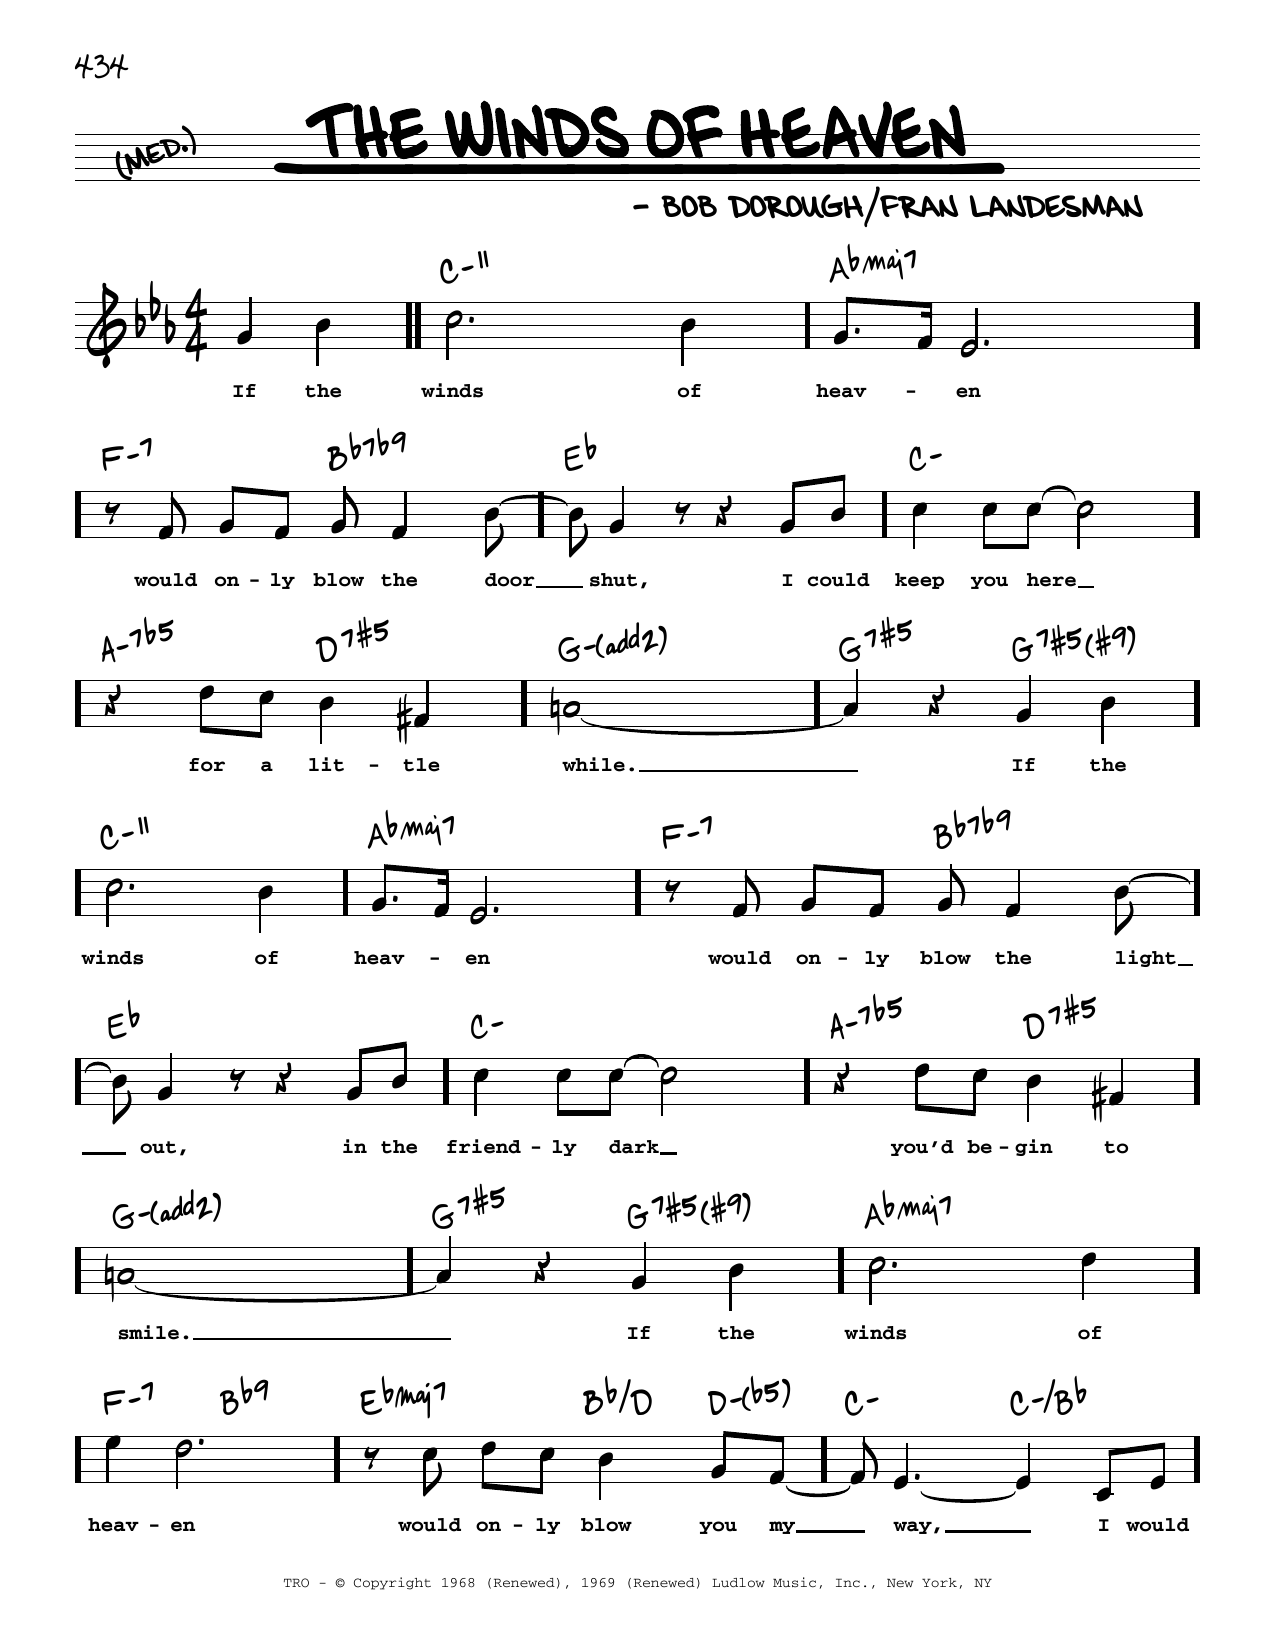 Download Fran Landesman and Bob Dorough The Winds Of Heaven (High Voice) Sheet Music